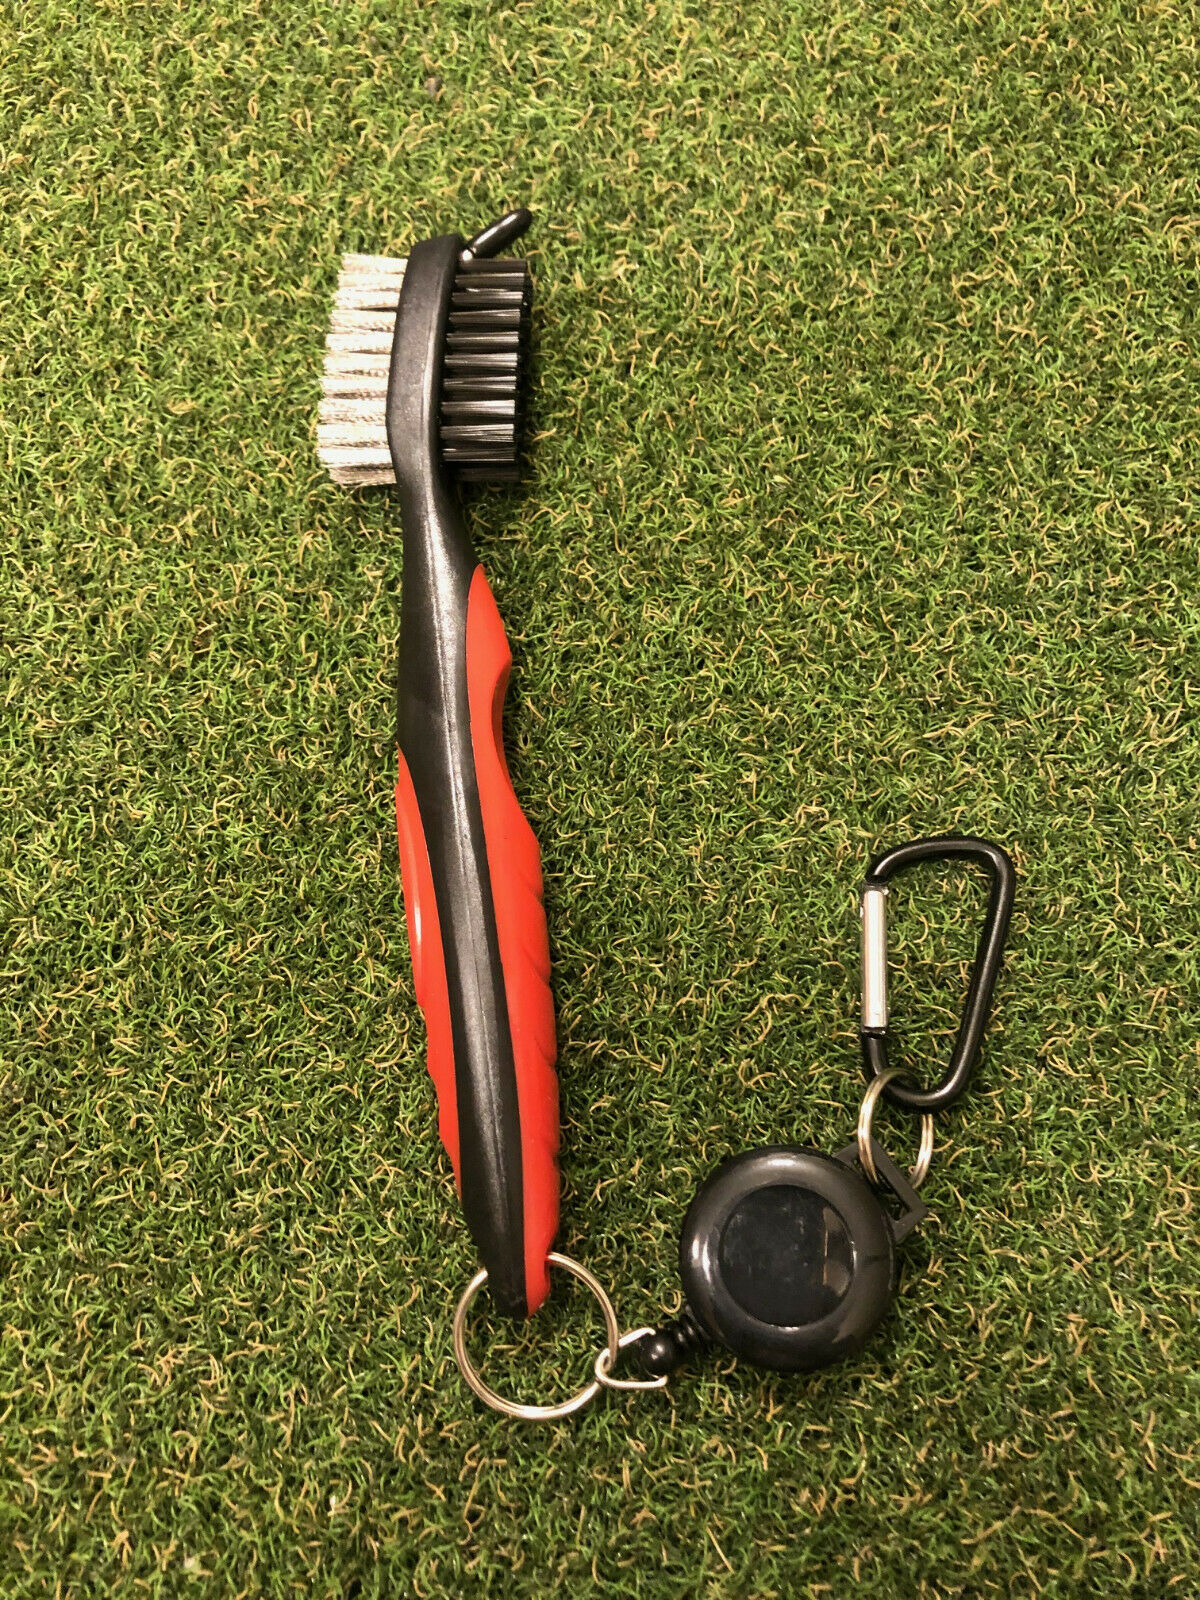 Groove Doctor Retracable Cleaning Brush And Tool - Carl's Golfland